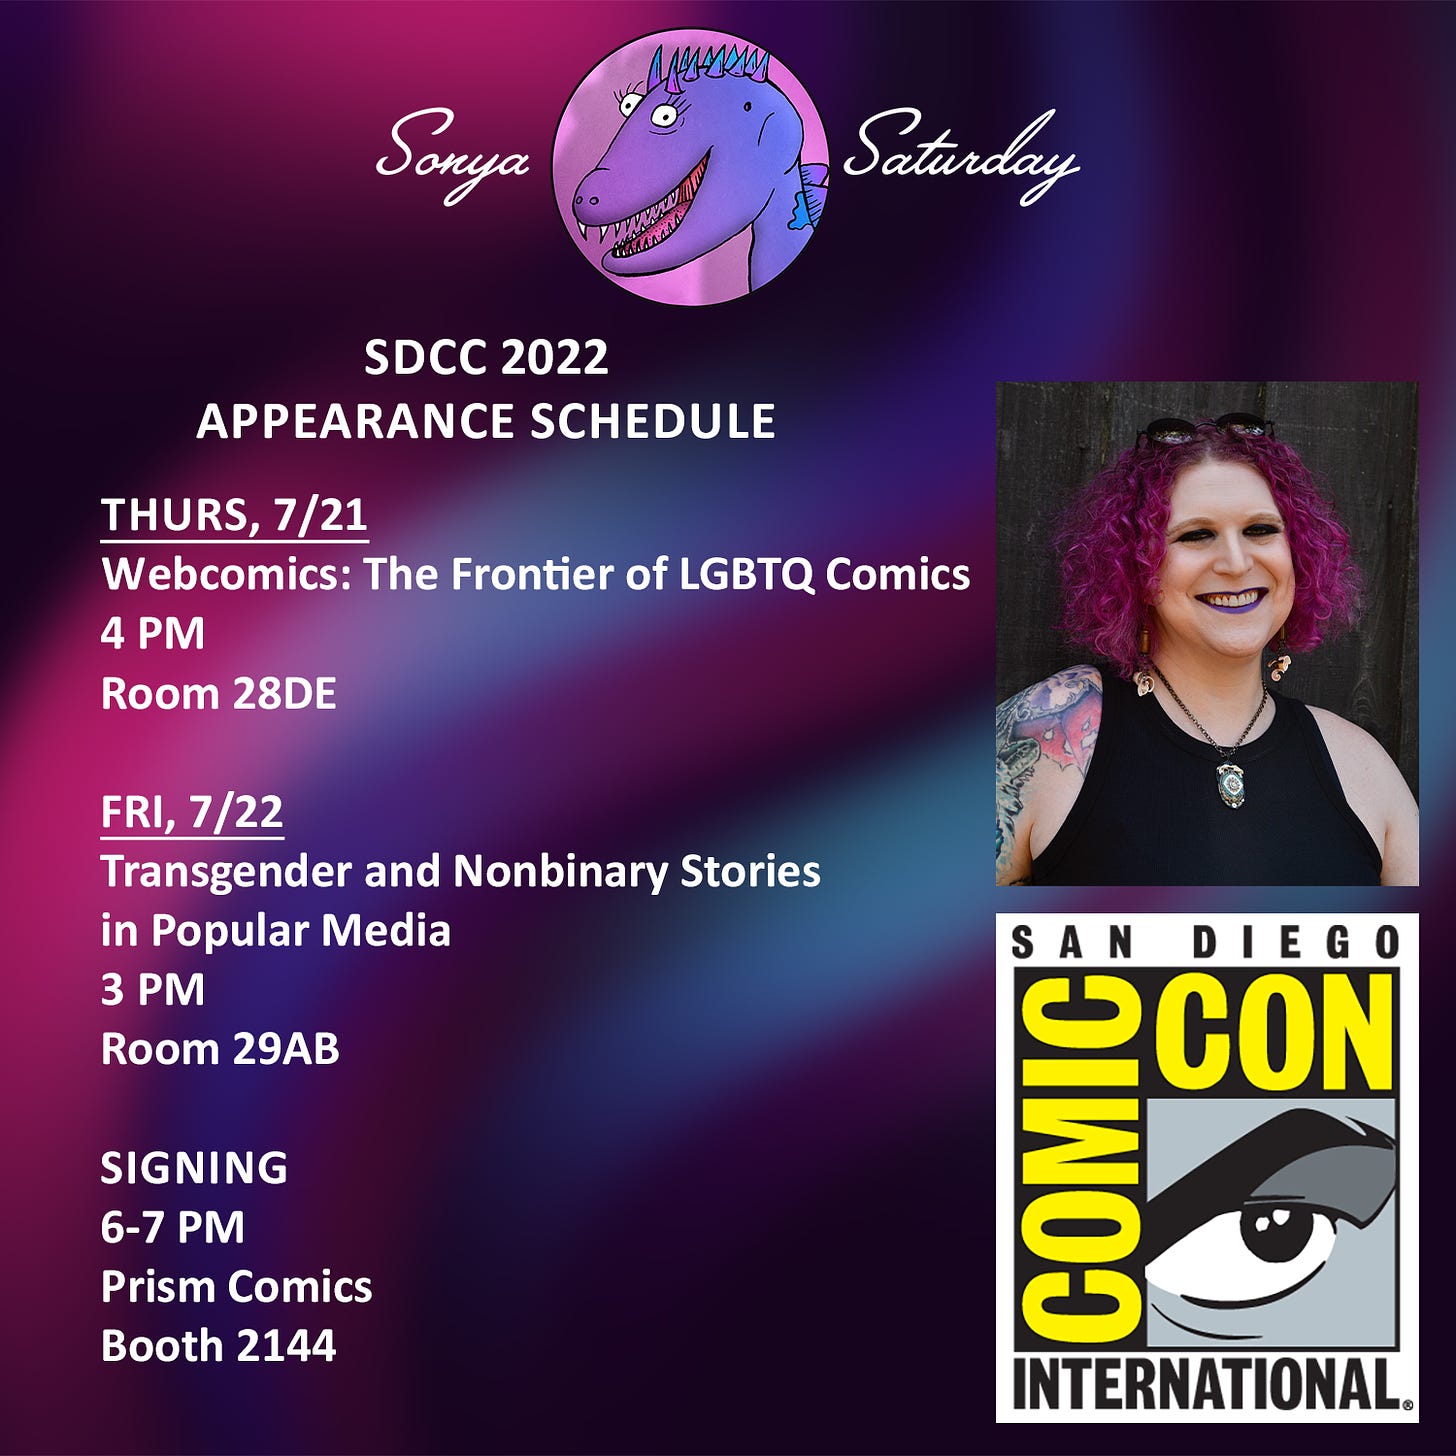 Sonya Saturday's SDCC 2022 appearance schedule